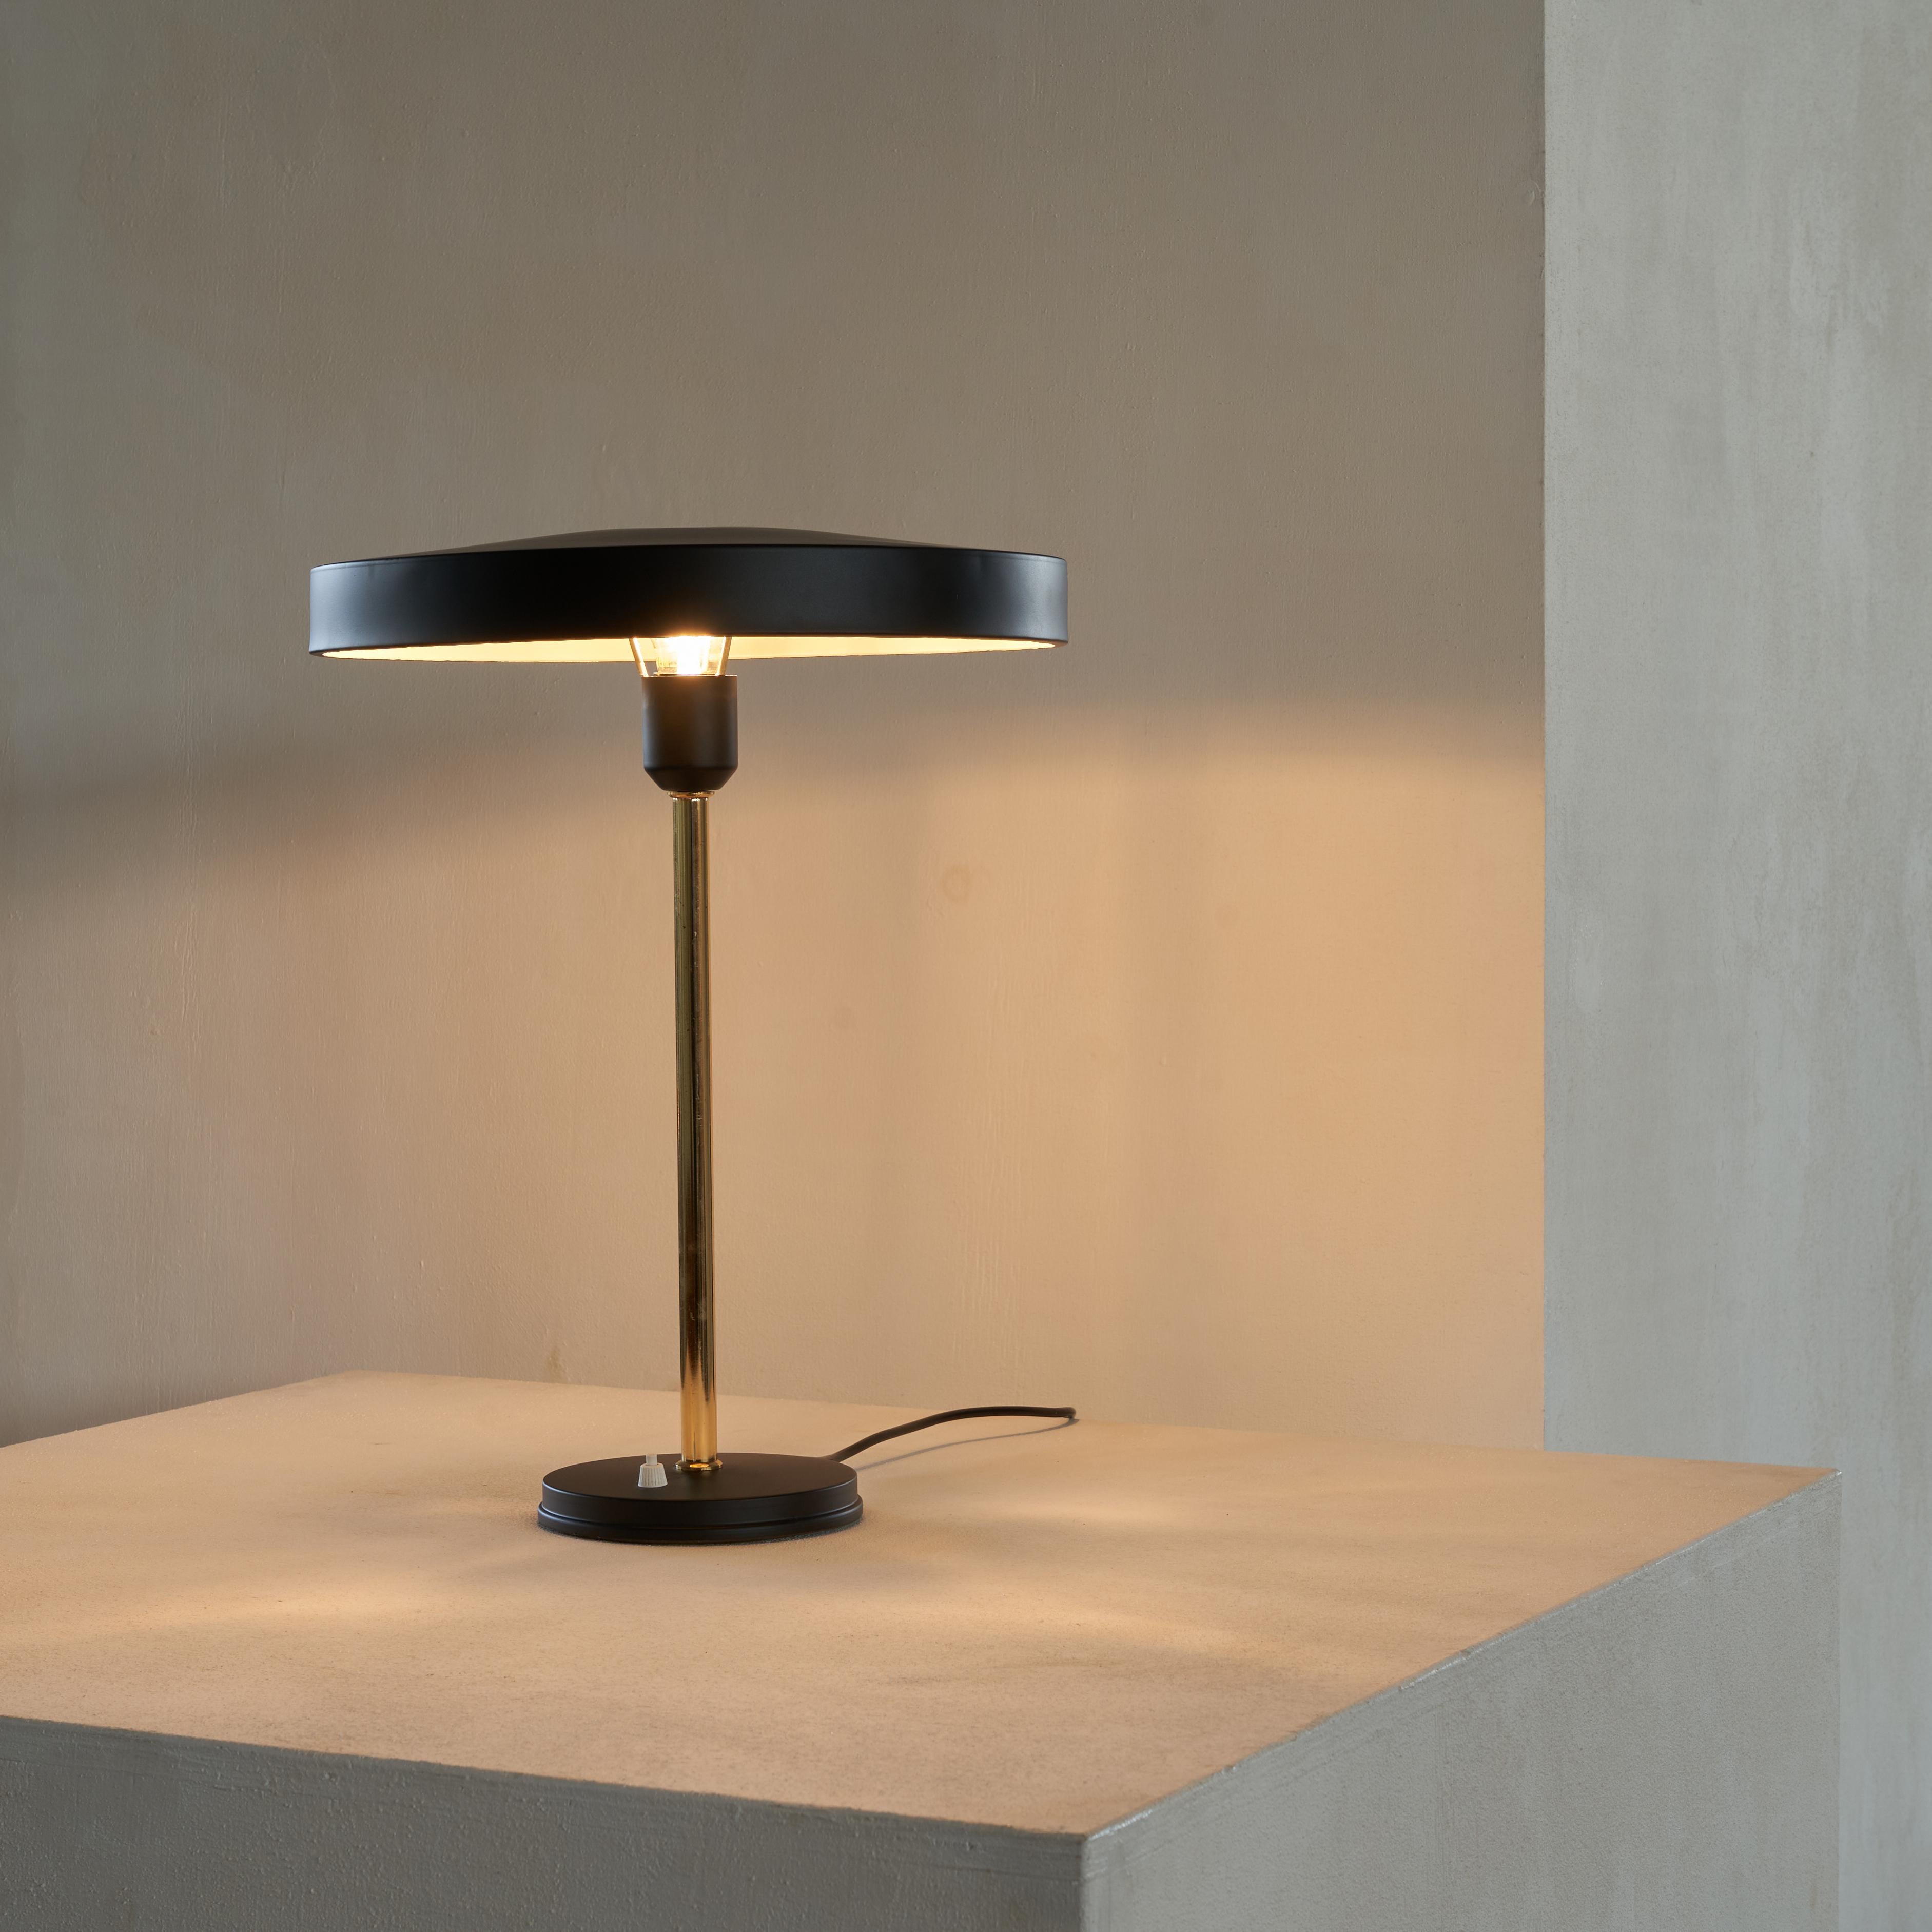 Louis Kalff 'Timor' table lamp. The Netherlands, 1960s.

Surprisingly large and imposing desk lamp by Louis Kalff. A simple and elegant design, with a metal base and shade and a stem in patinated brass. One of the designs Louis Kalff made for